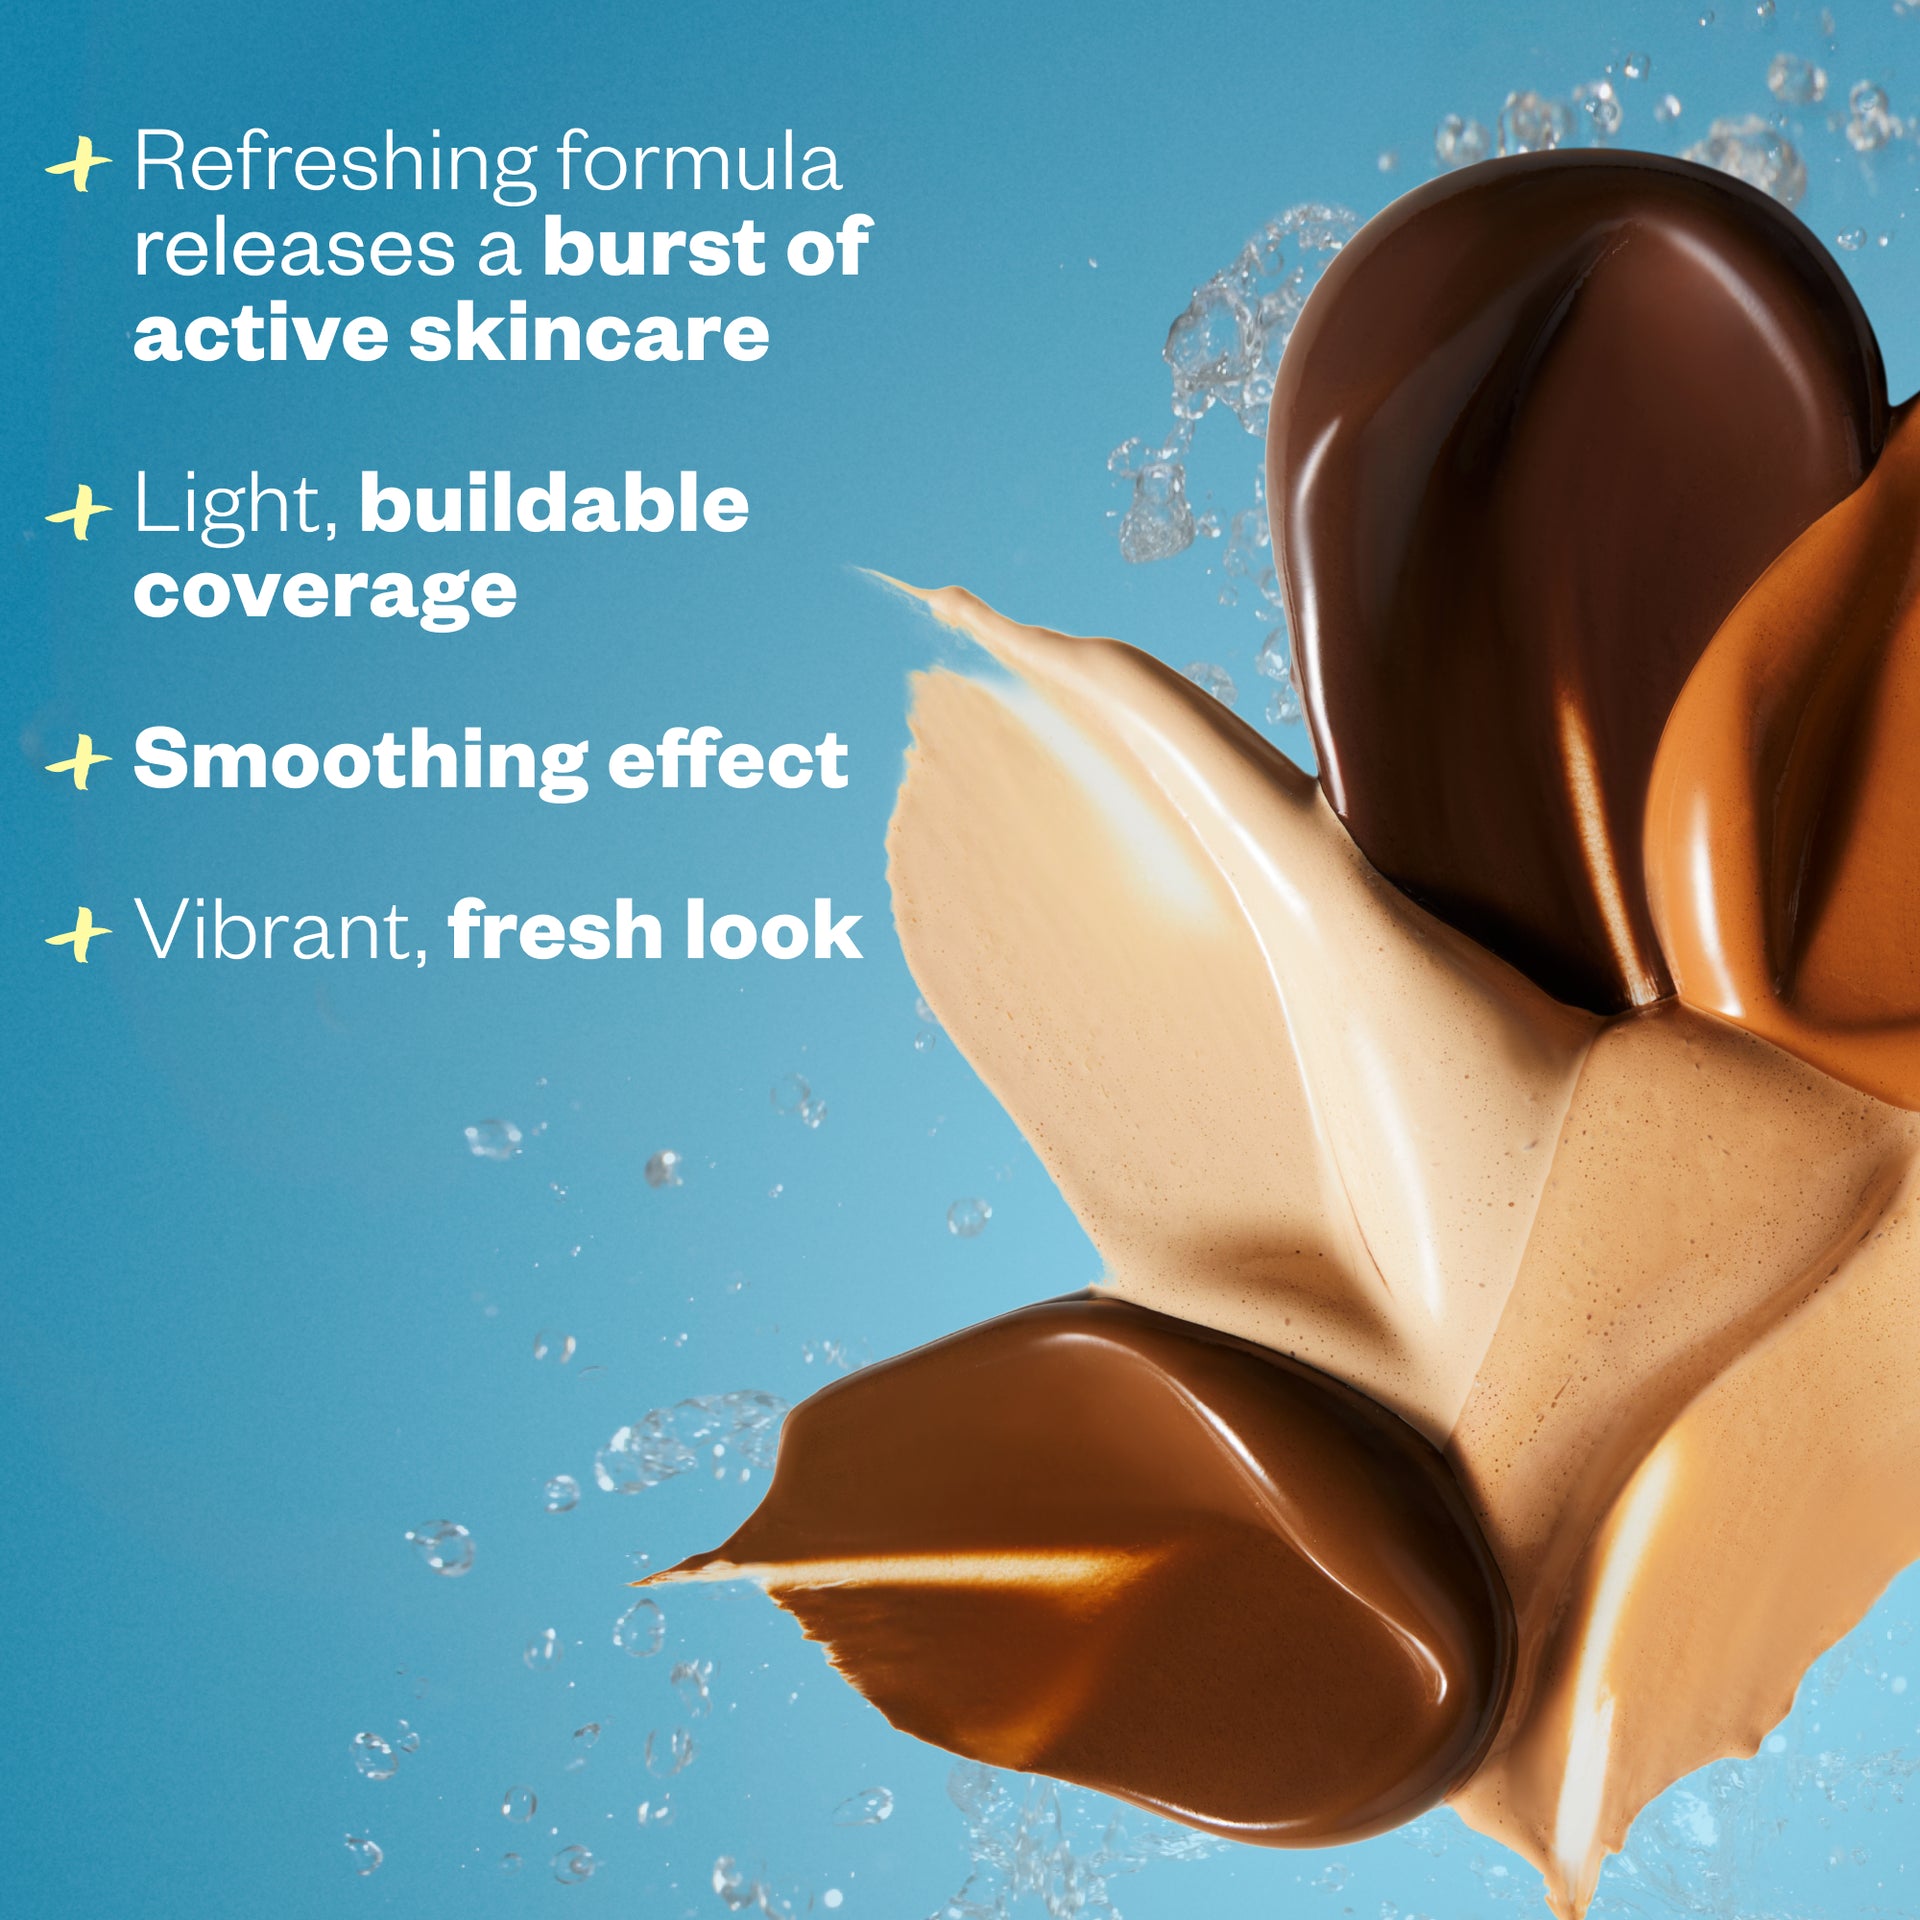 + refreshing formula releases a burst of active skincare. + light, buildable coverage. + smoothing effect. + vibrant fresh look.